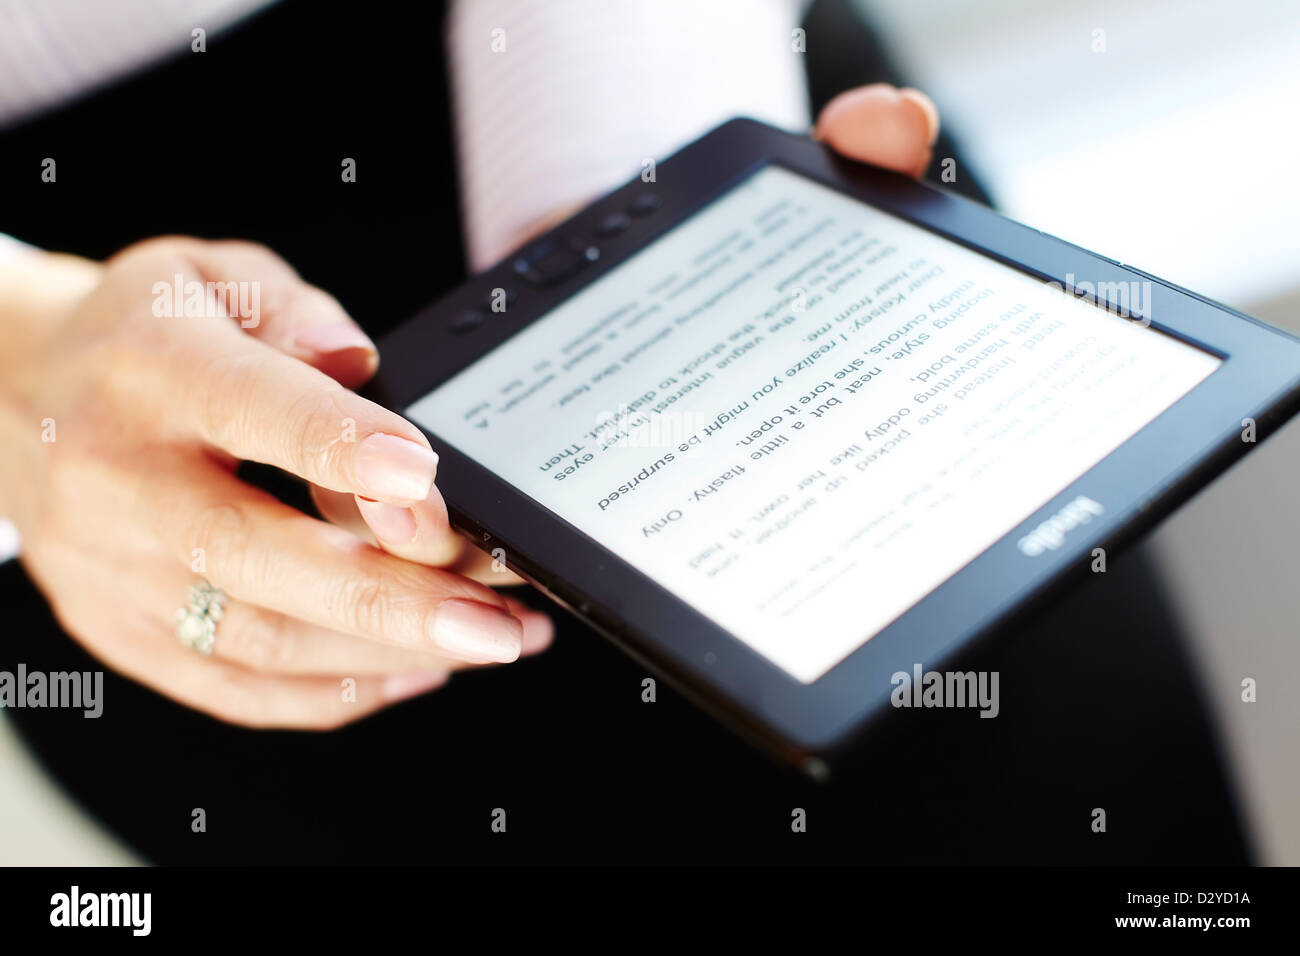 Woman reading a Kindle Stock Photo